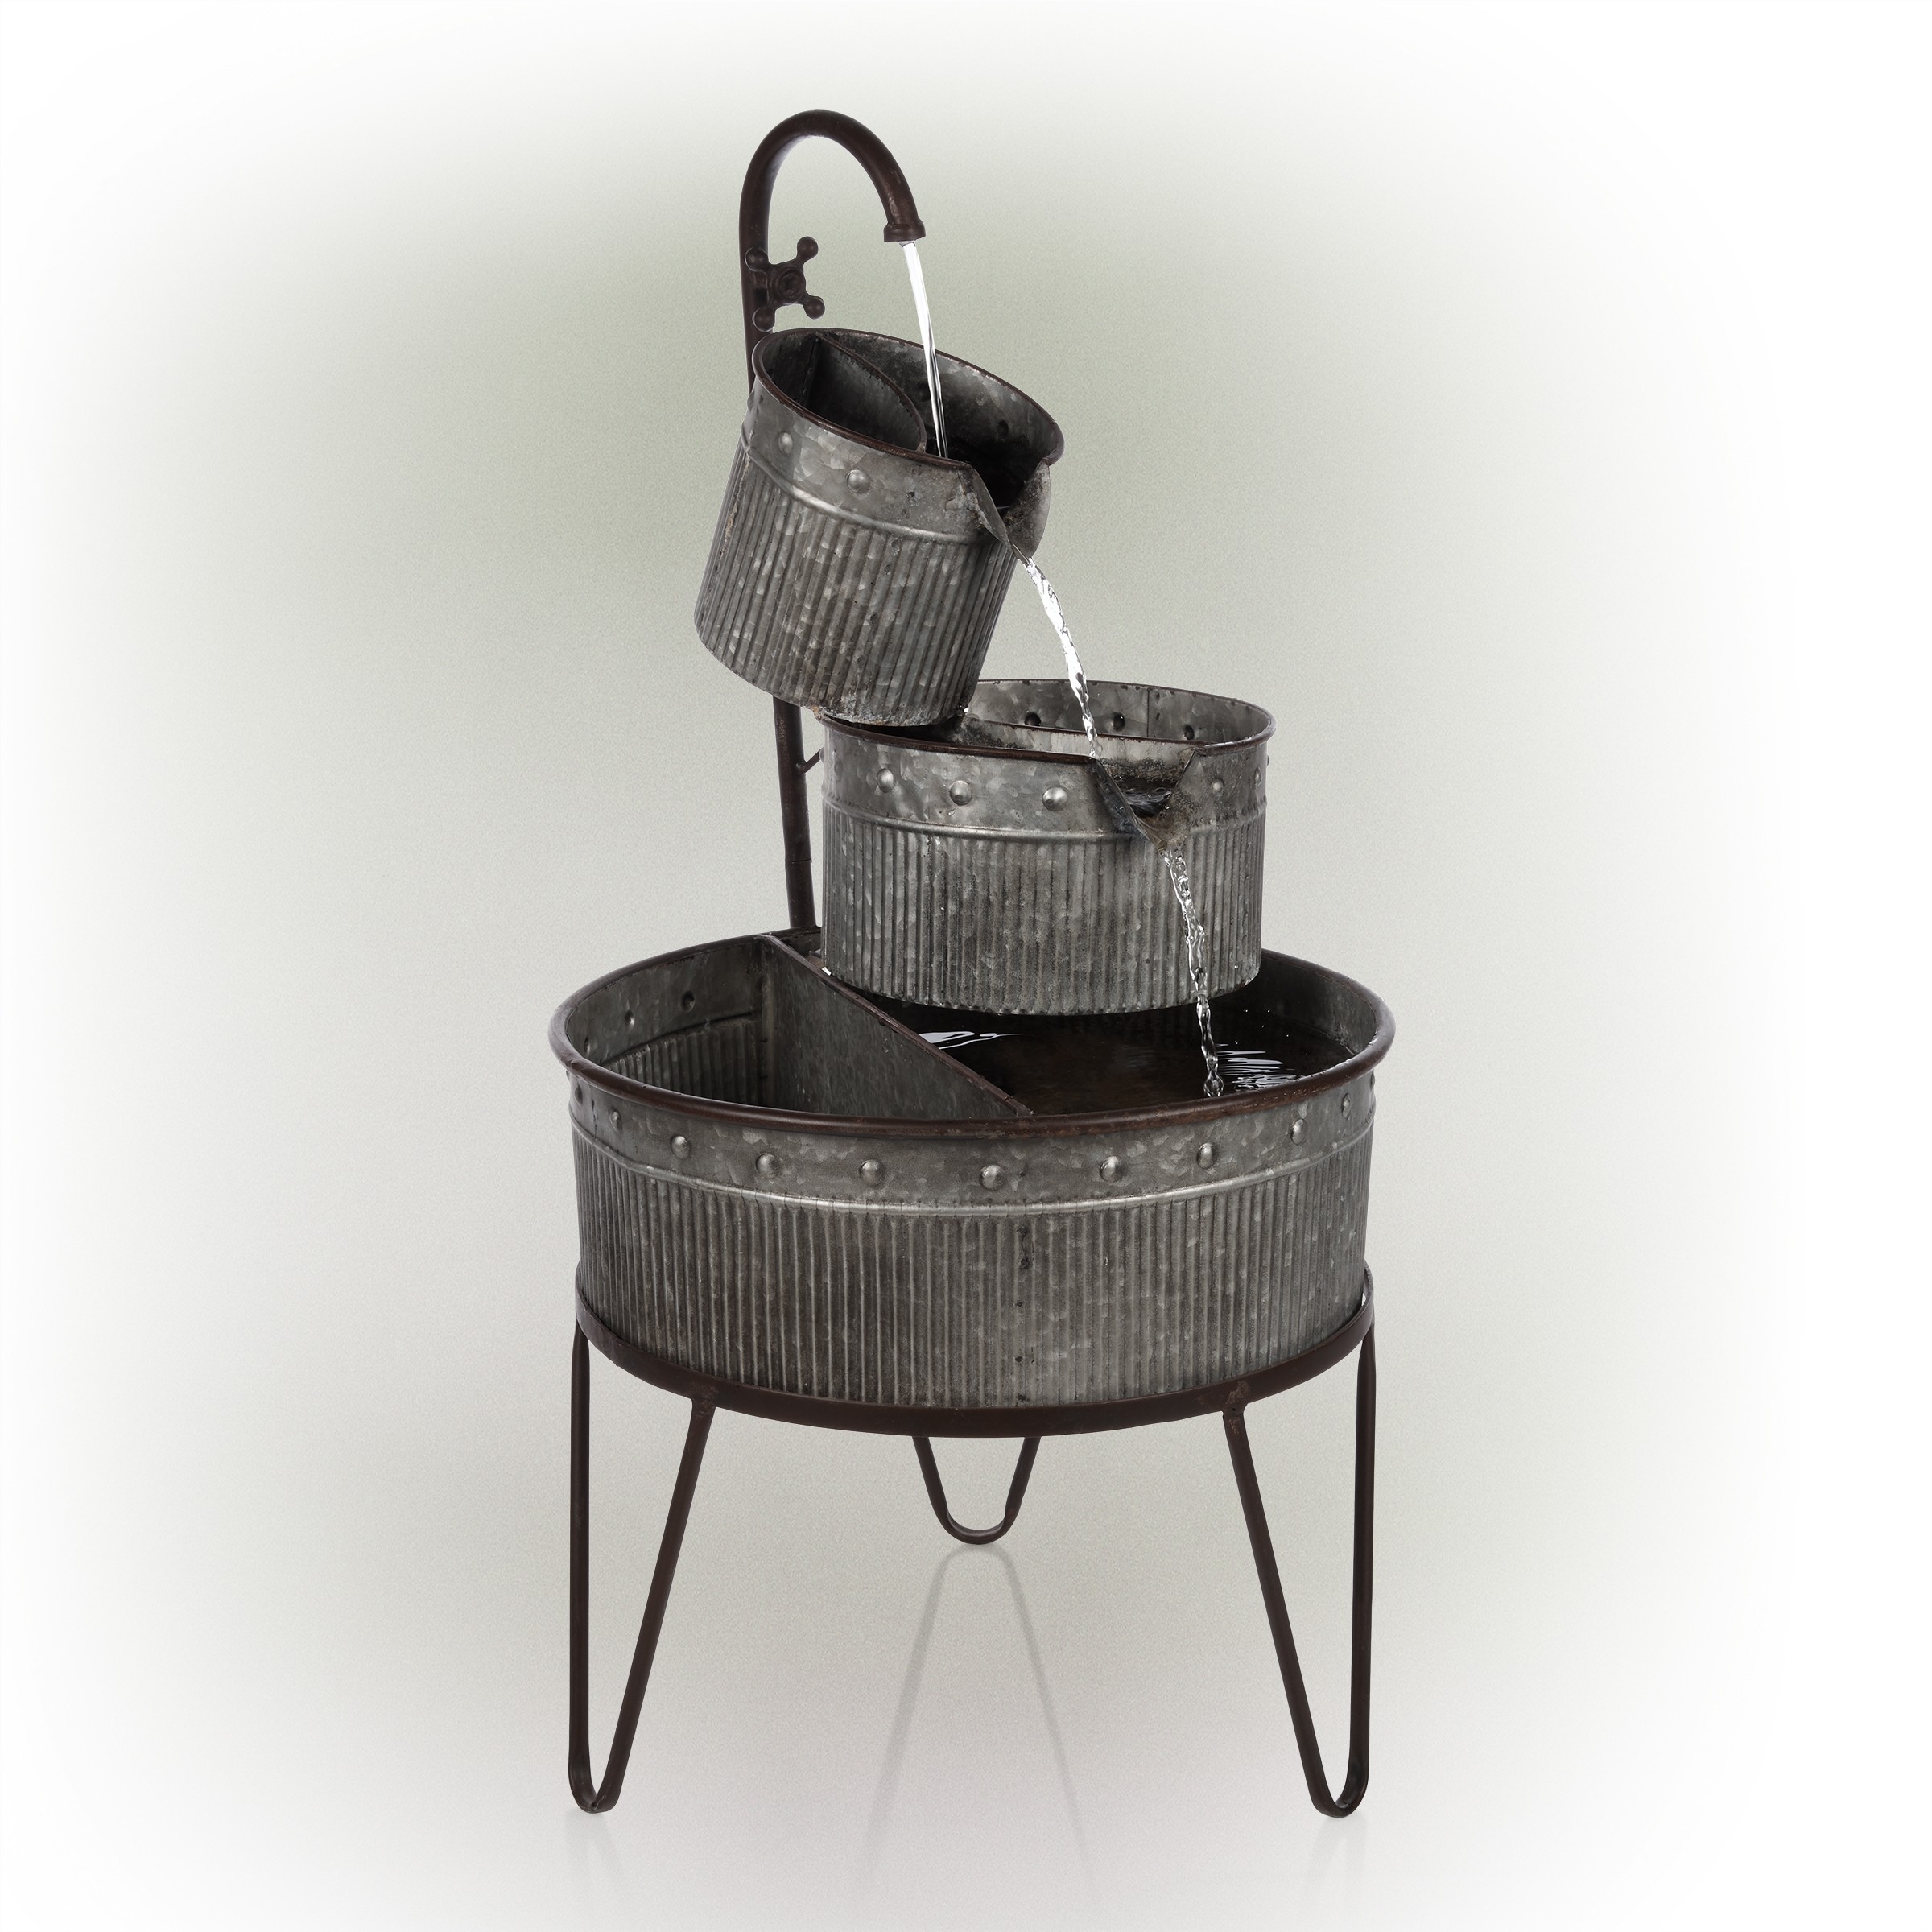 3-TIER STACKED RUSTIC METAL TUB PLANTER FOUNTAIN 